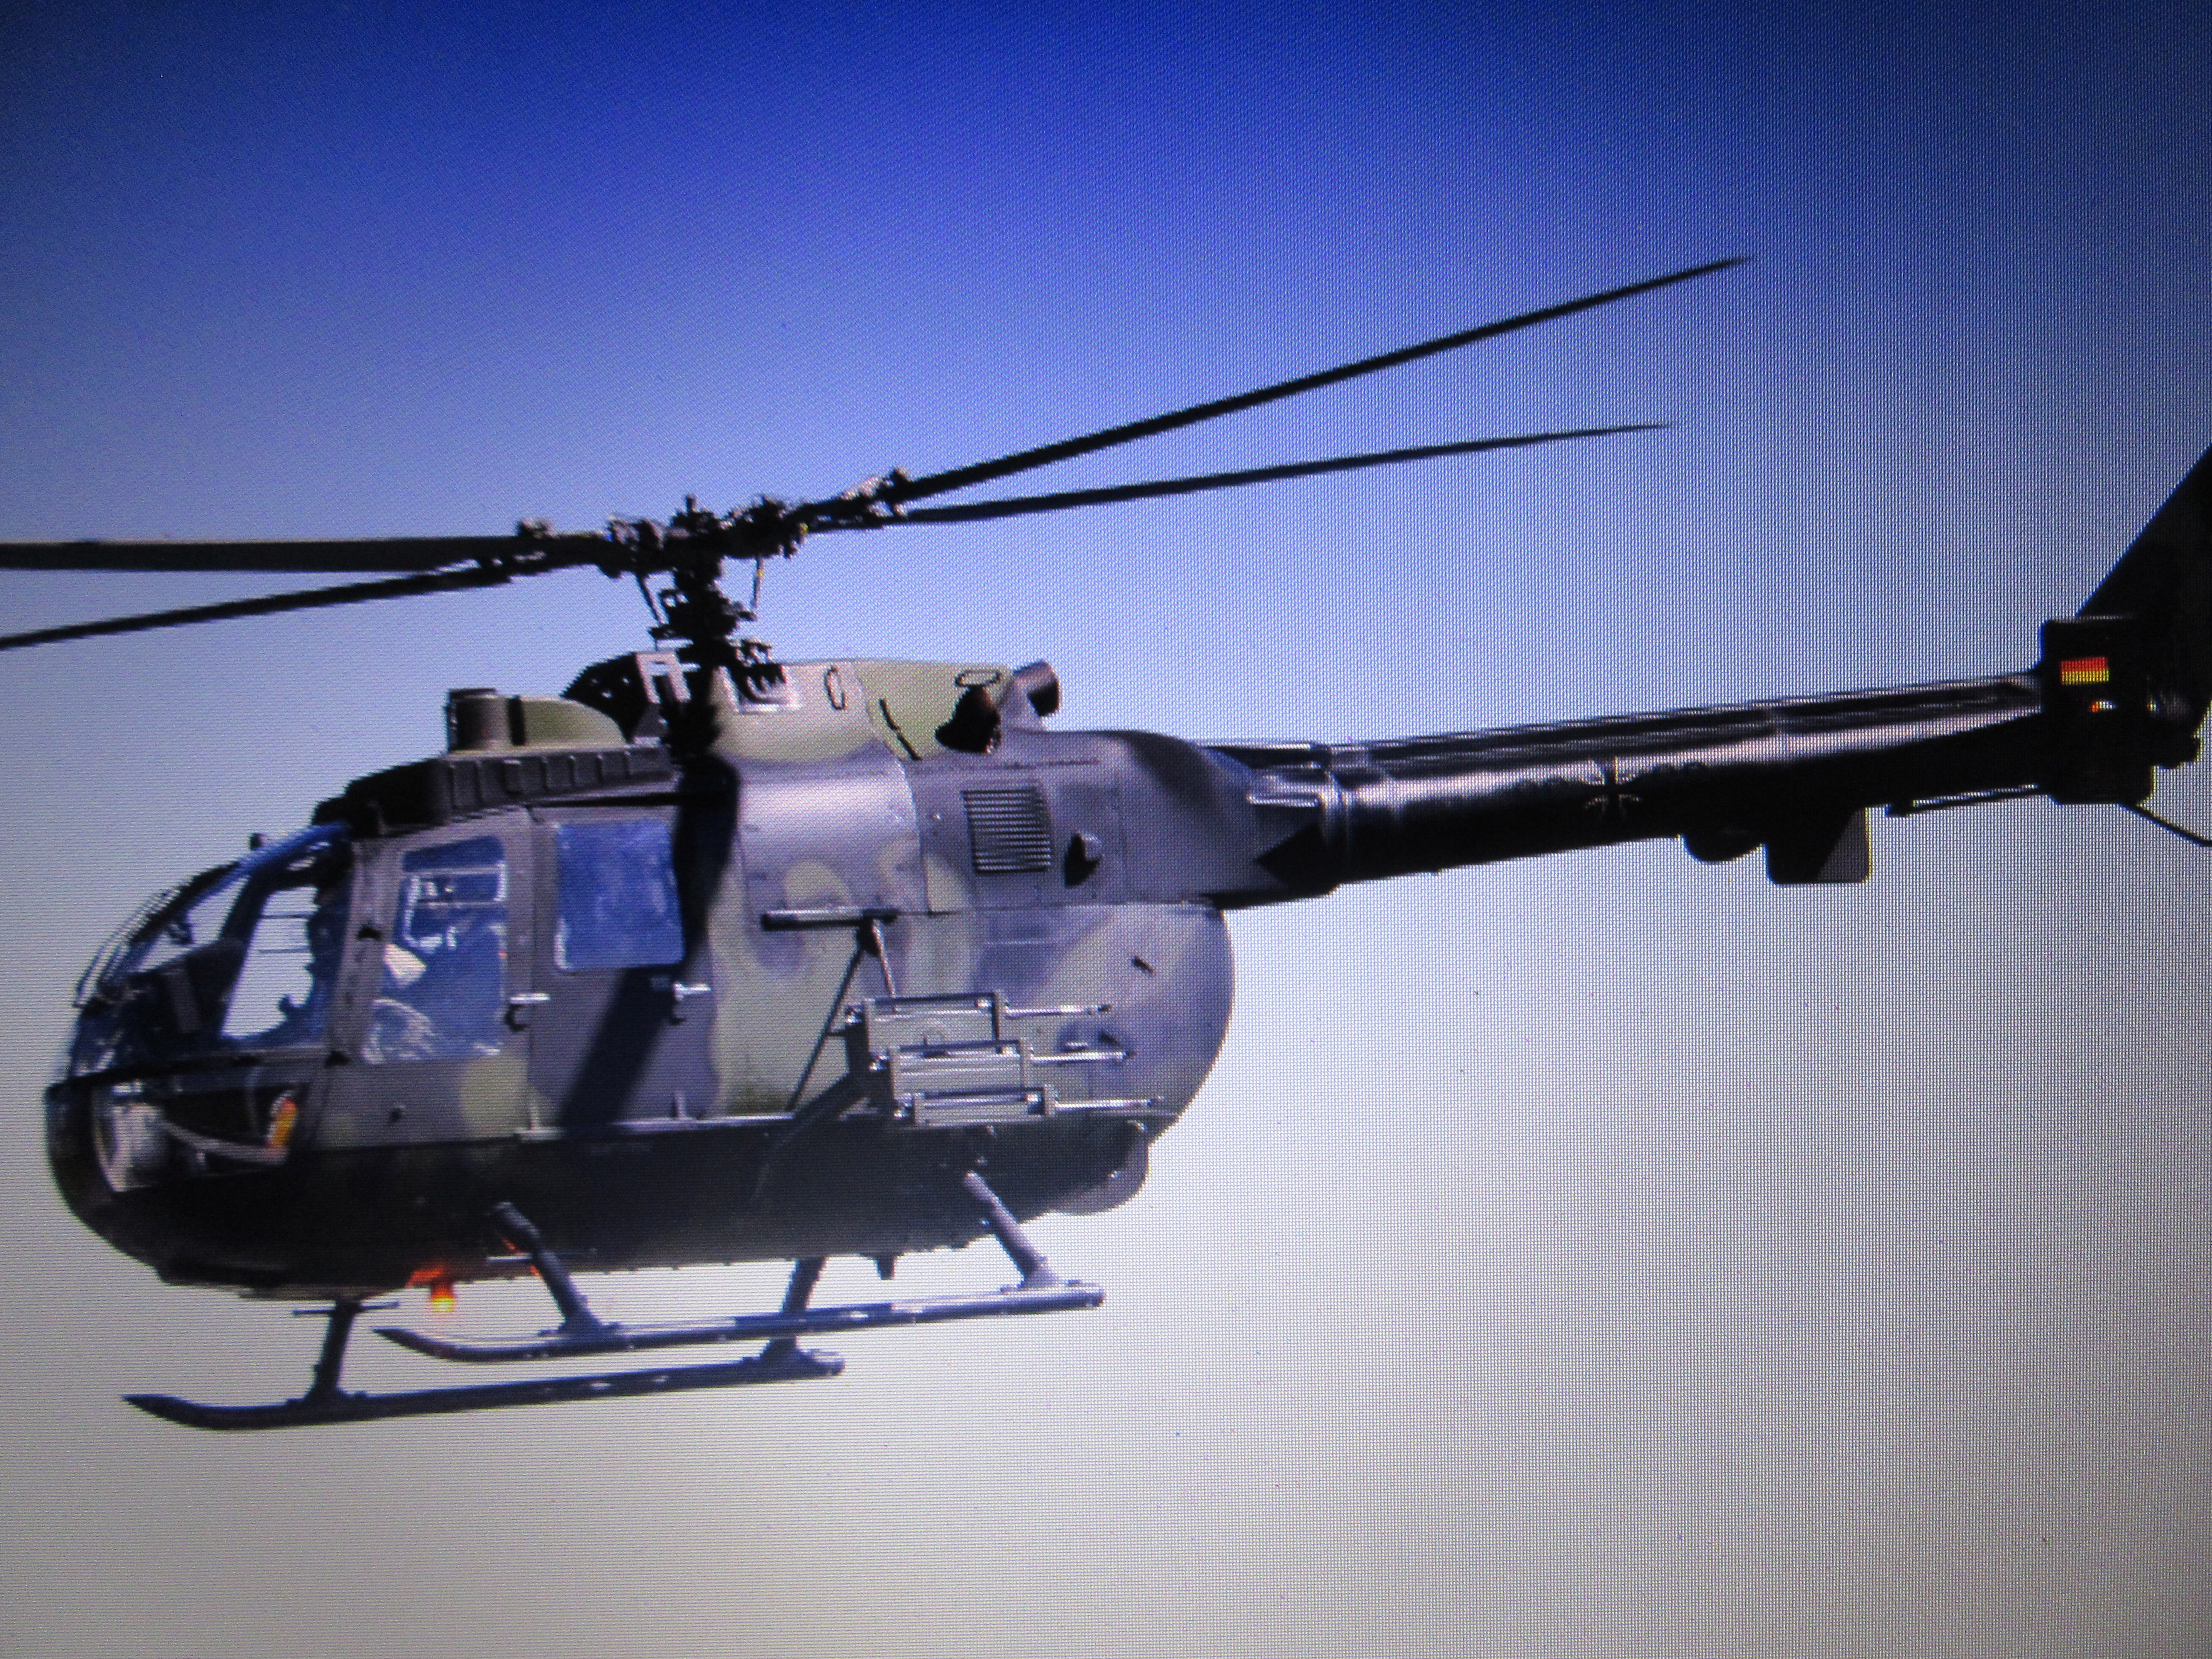 Writing a letter of recommendation usaf helicopters